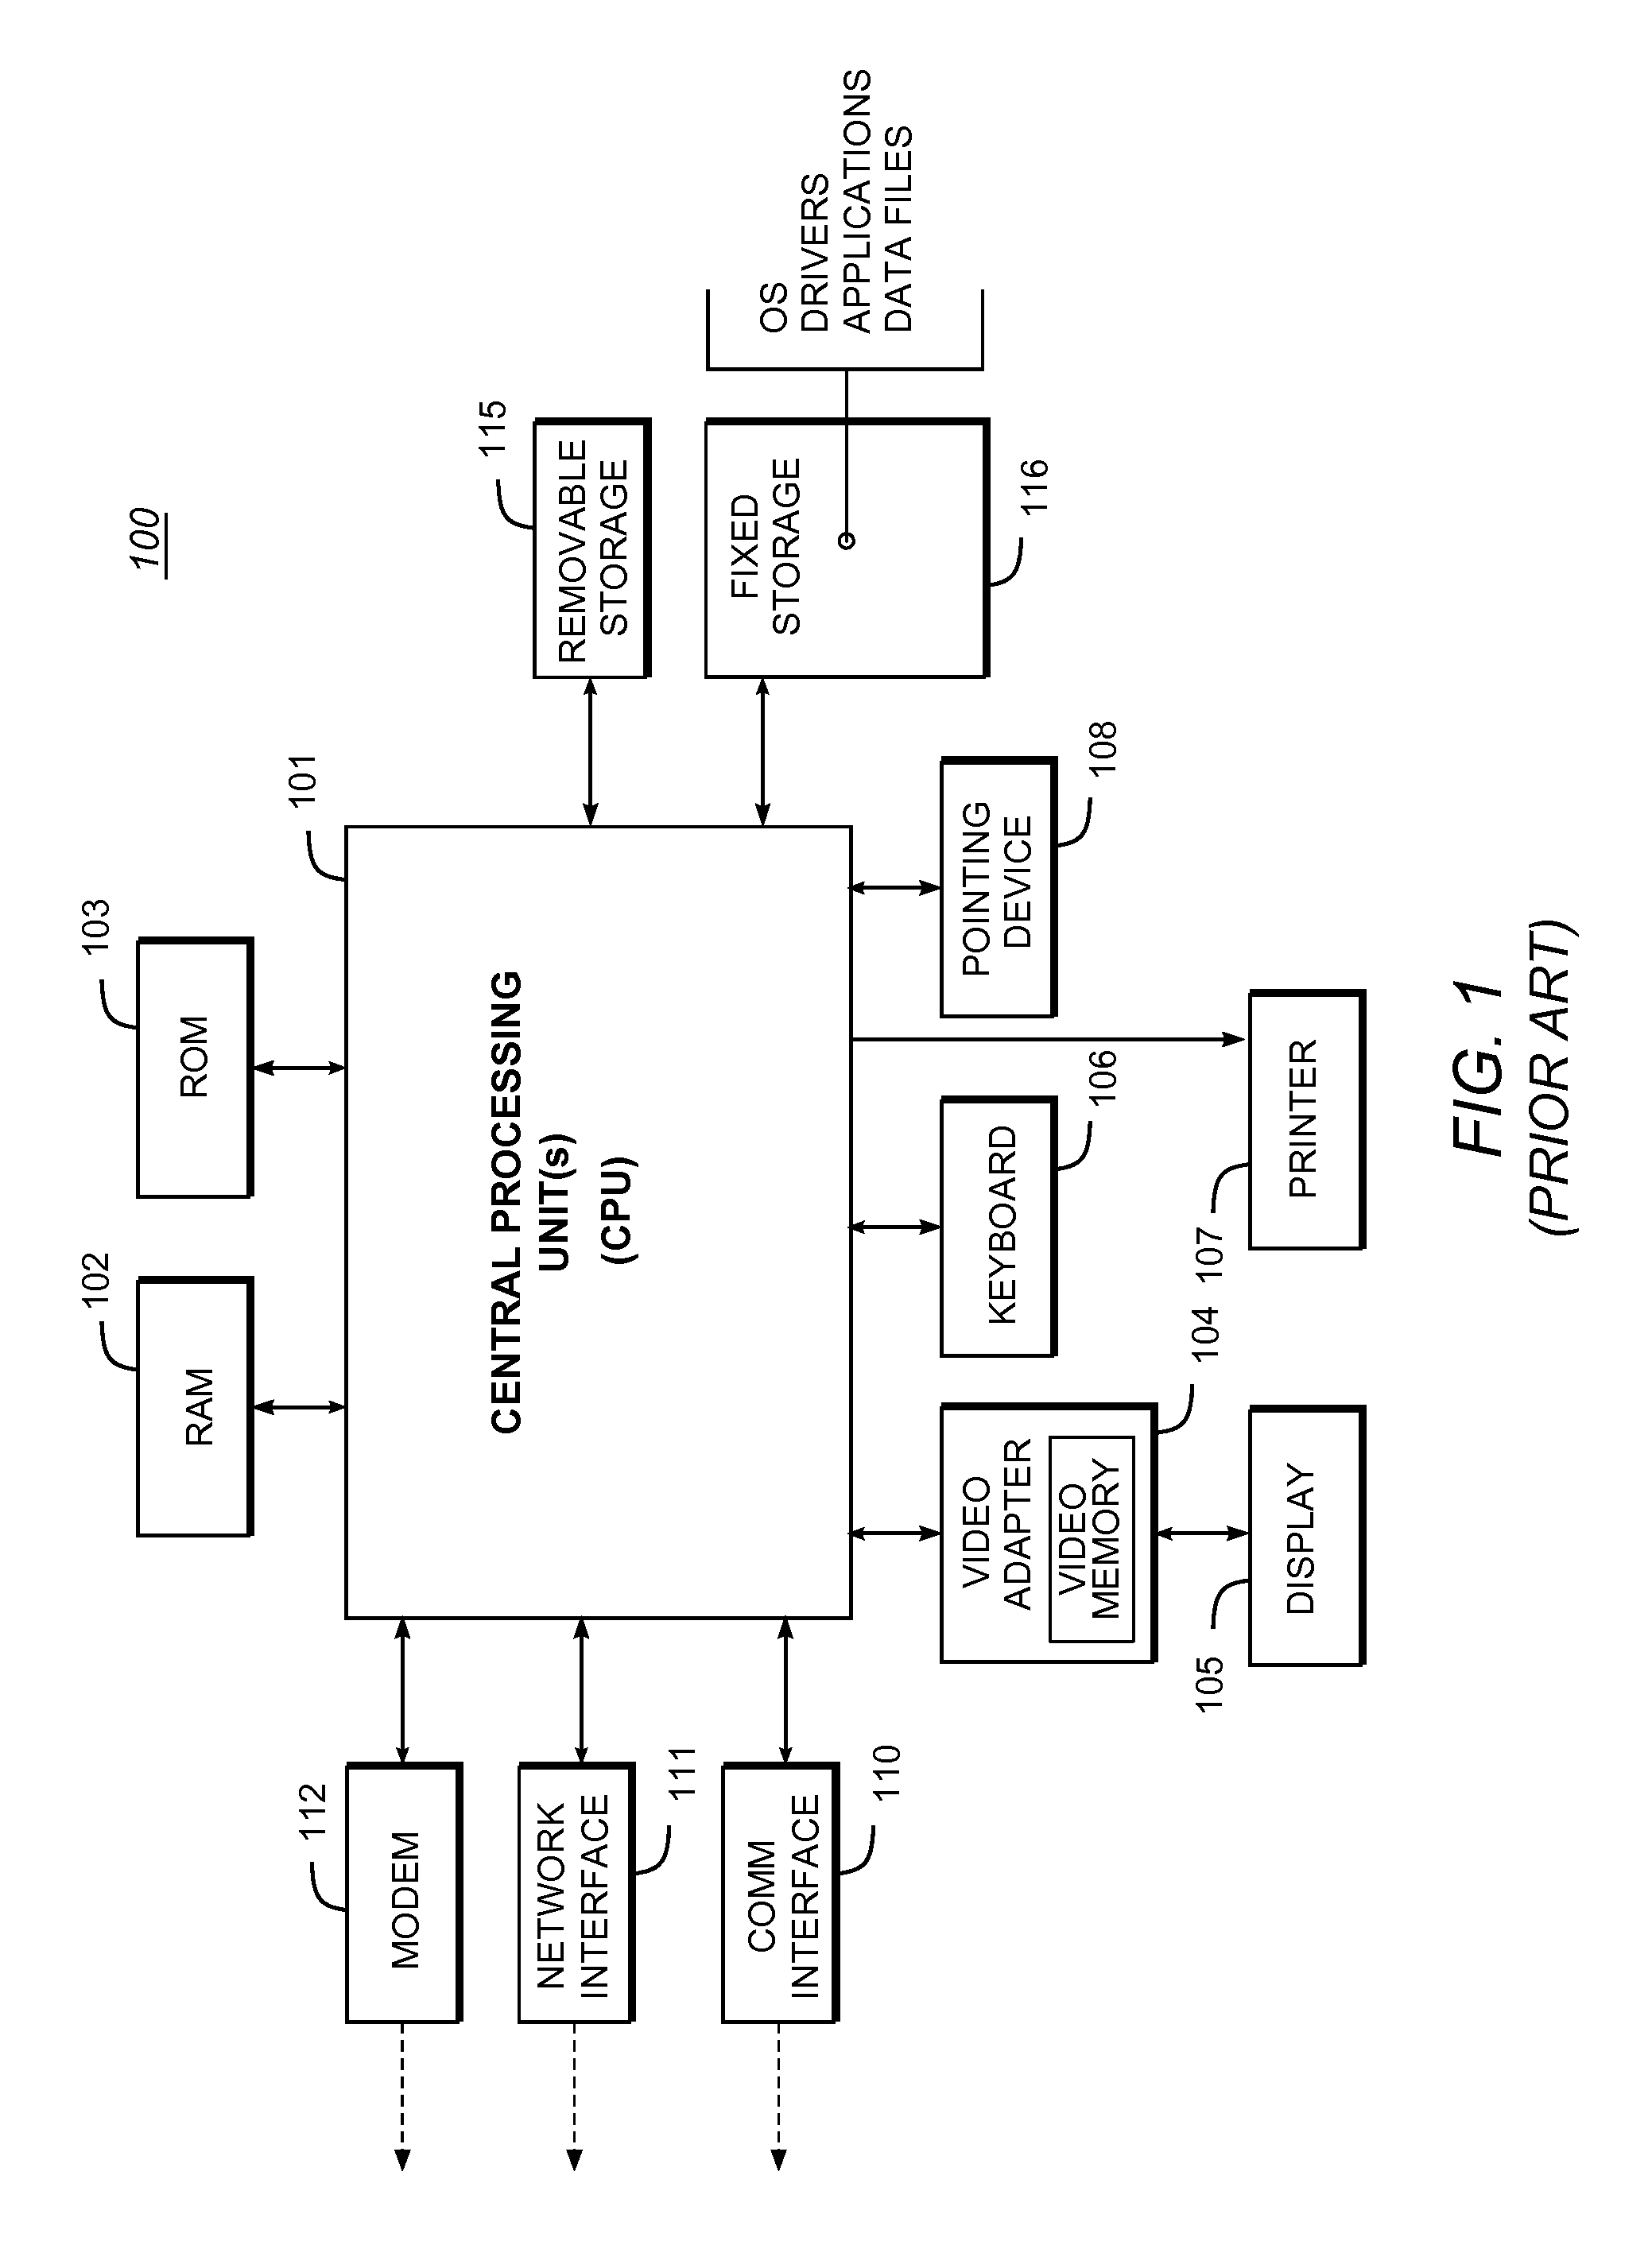 System and Methods Providing Secure Workspace Sessions